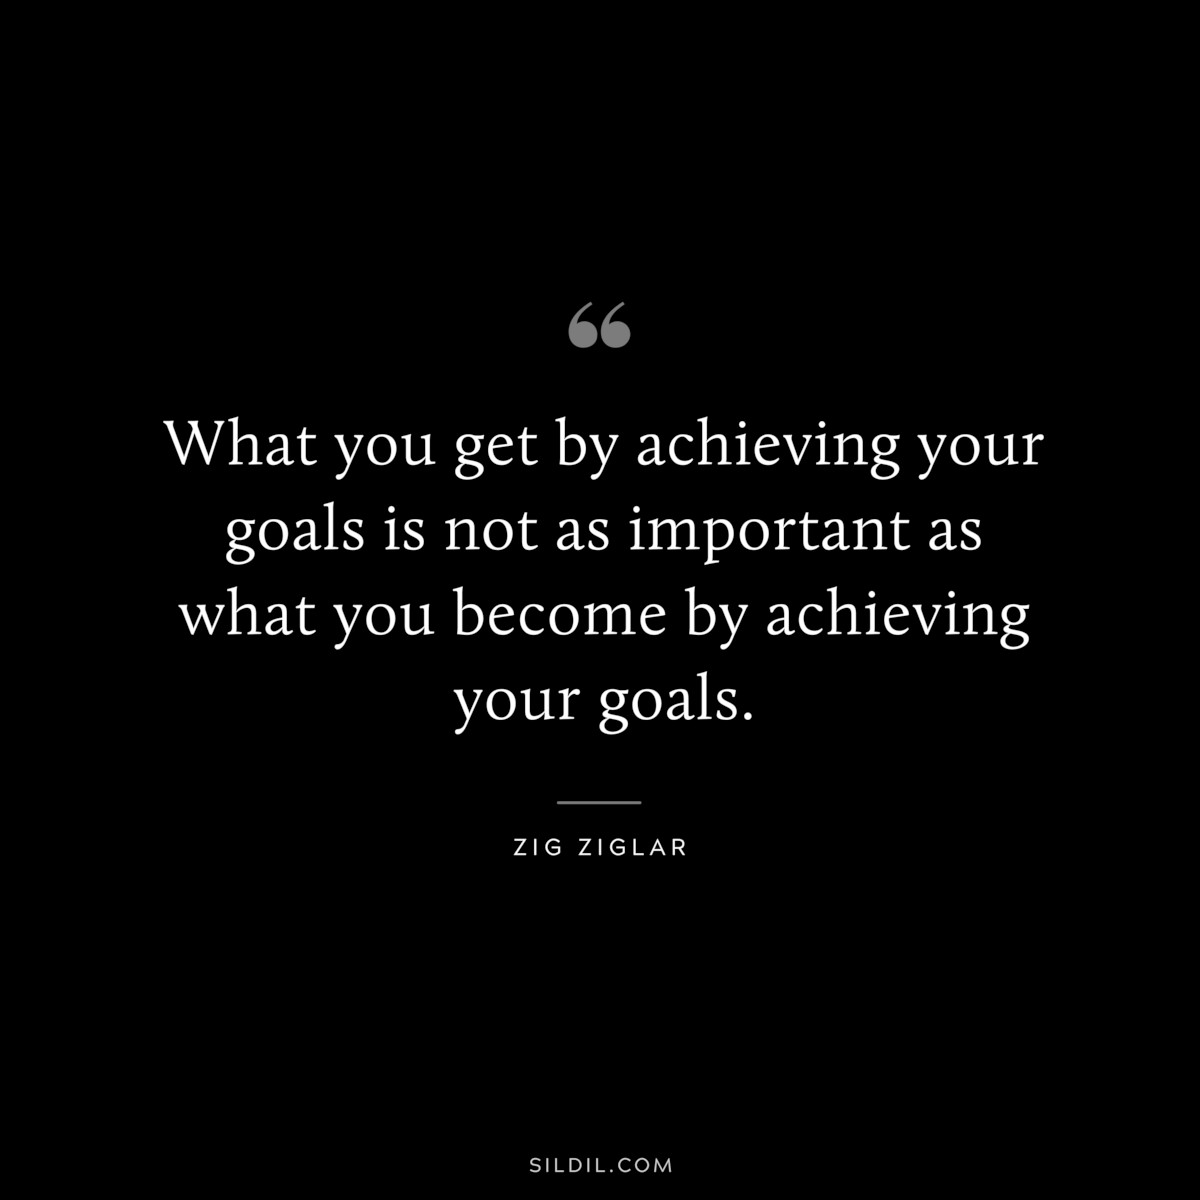 What you get by achieving your goals is not as important as what you become by achieving your goals. ― Zig Ziglar